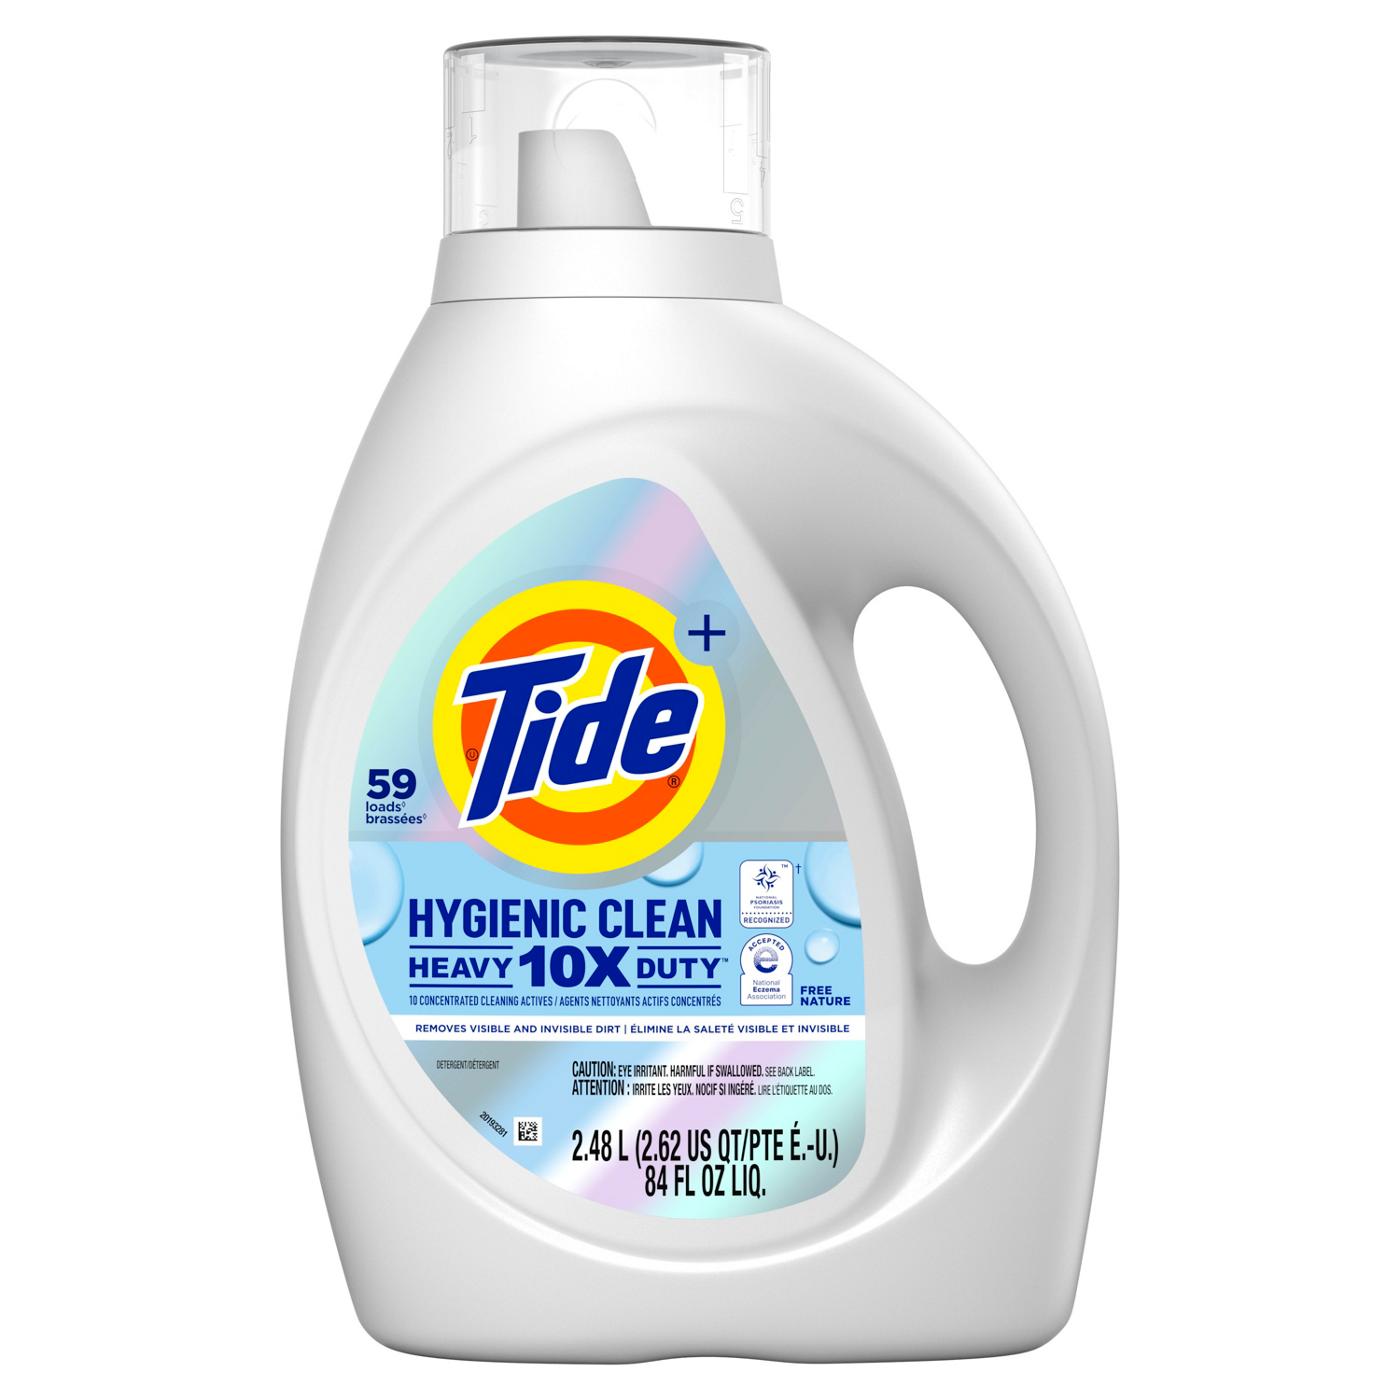 Tide + Hygienic Clean Heavy Duty HE Liquid Laundry Detergent, 59 Loads - Free Nature; image 1 of 6